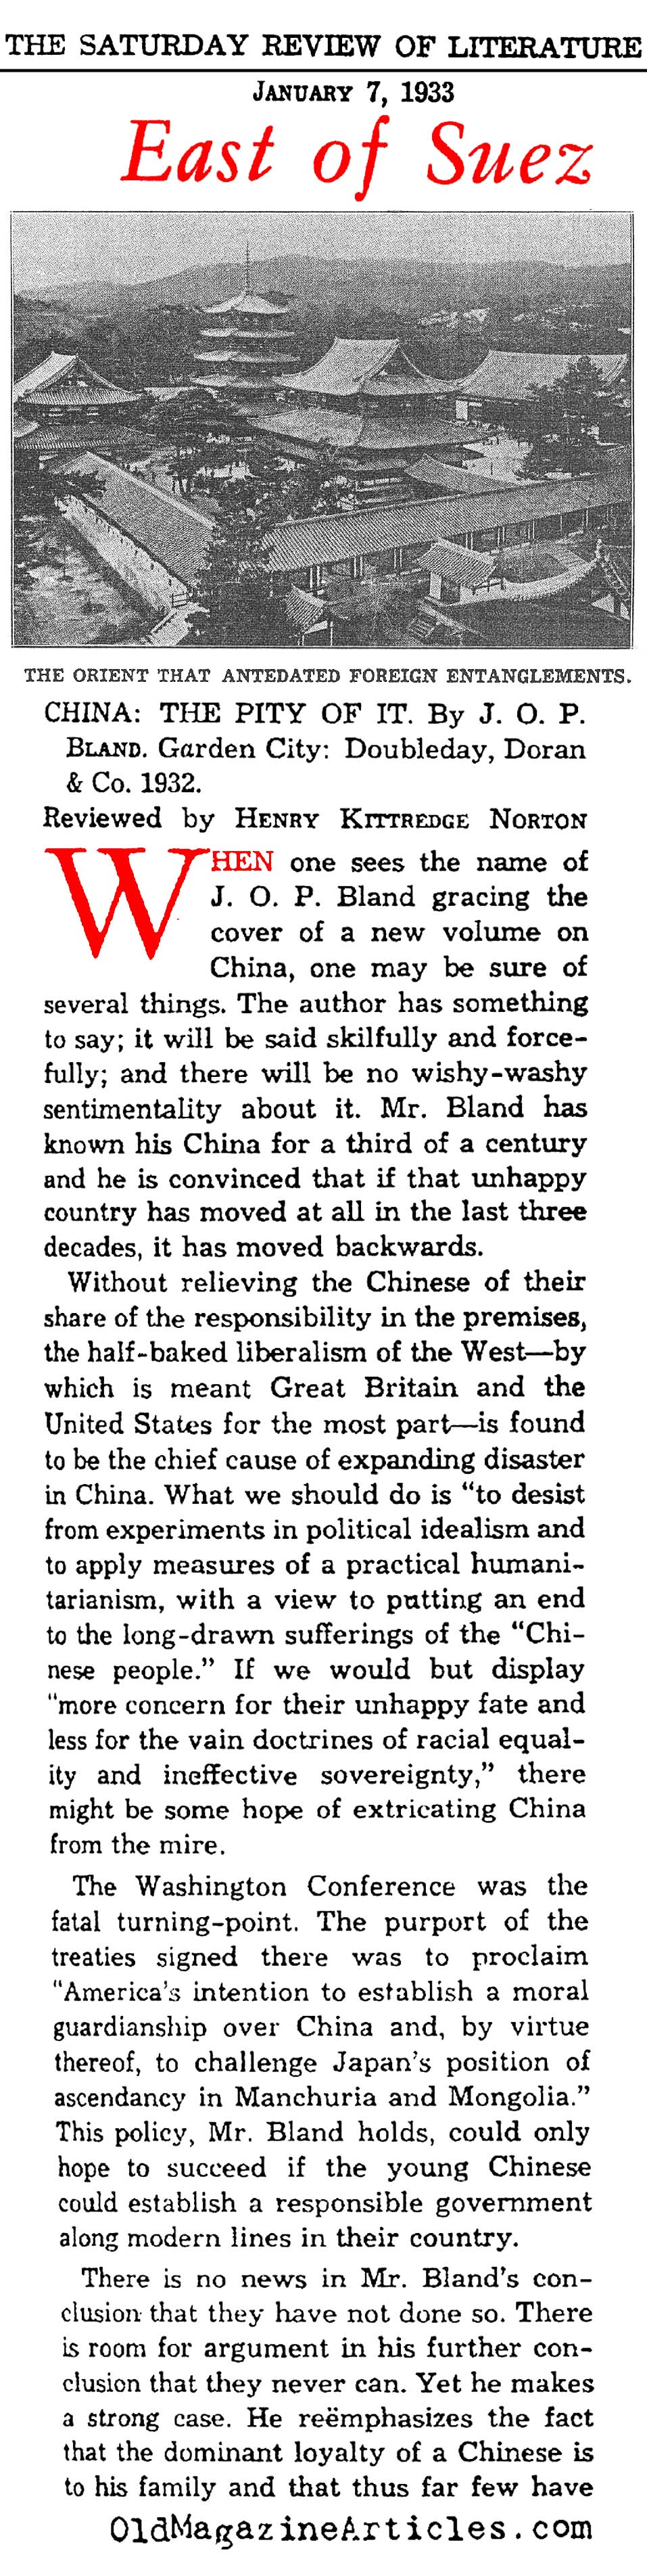 ''China: The Pity of It'' (Saturday Review of Literature, 1933)